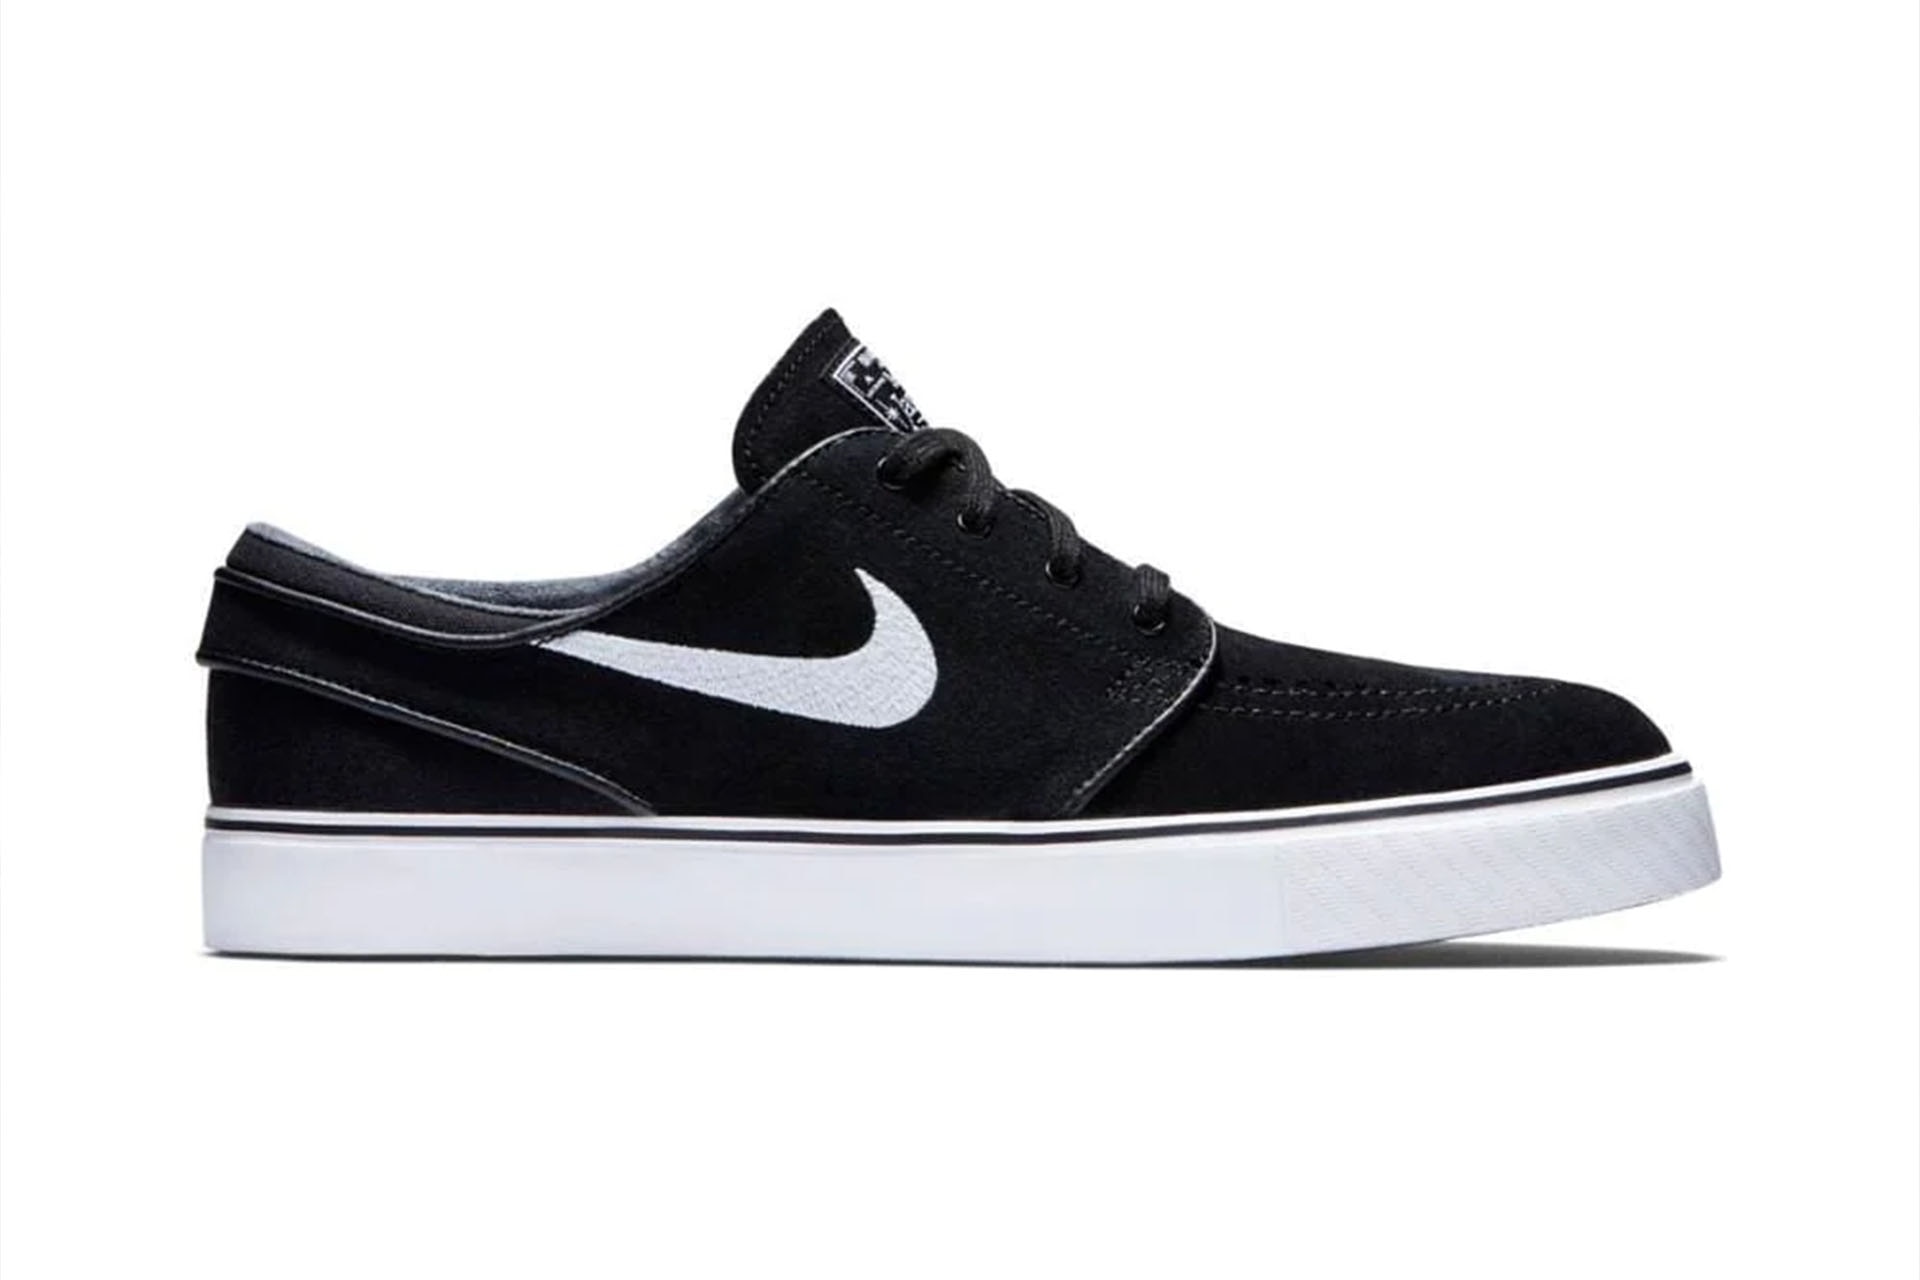 The oral history of how the Nike Stefan Janoski became an unlikely hit ...